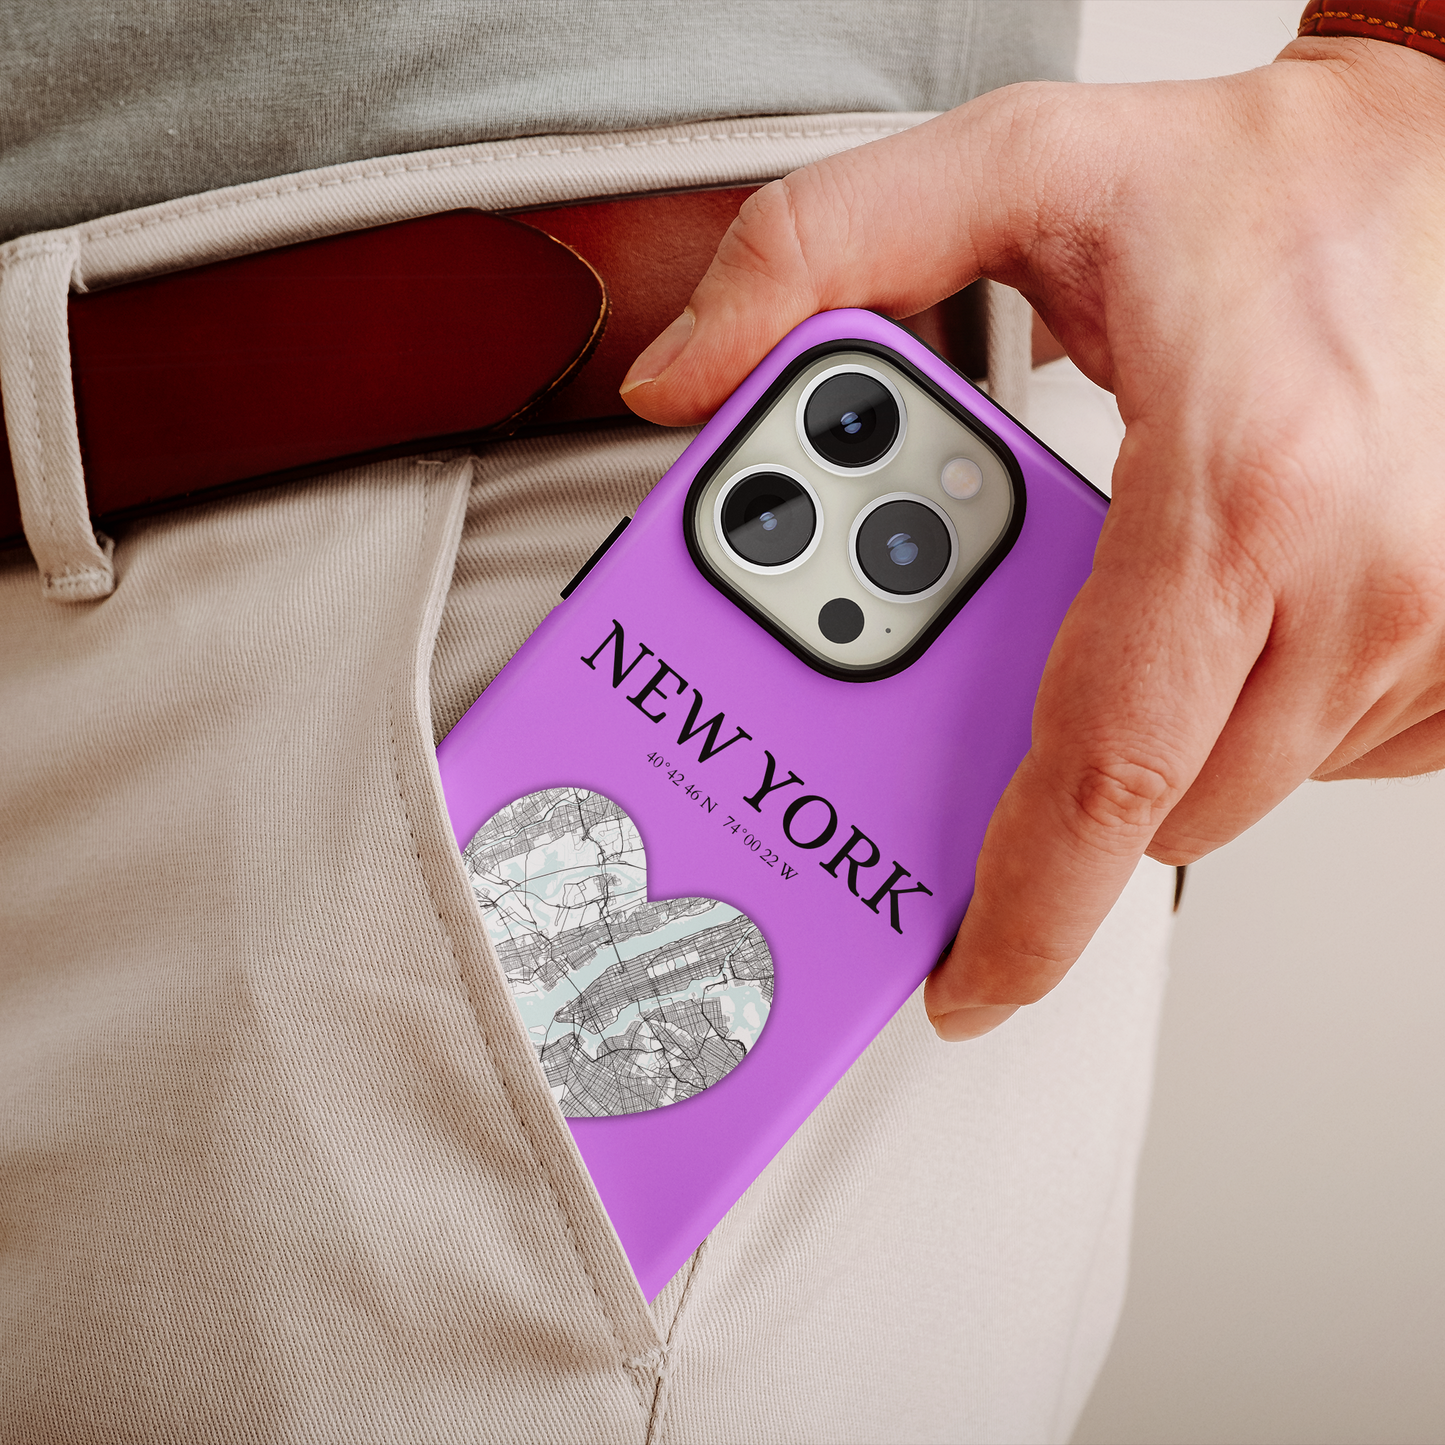 Add a touch of New York to your iPhone with the Purple Heartbeat MagSafe Case, offering durable protection, seamless MagSafe compatibility, and a choice between matt-York Heartbeat - Purple (iPhone MagSafe Case)